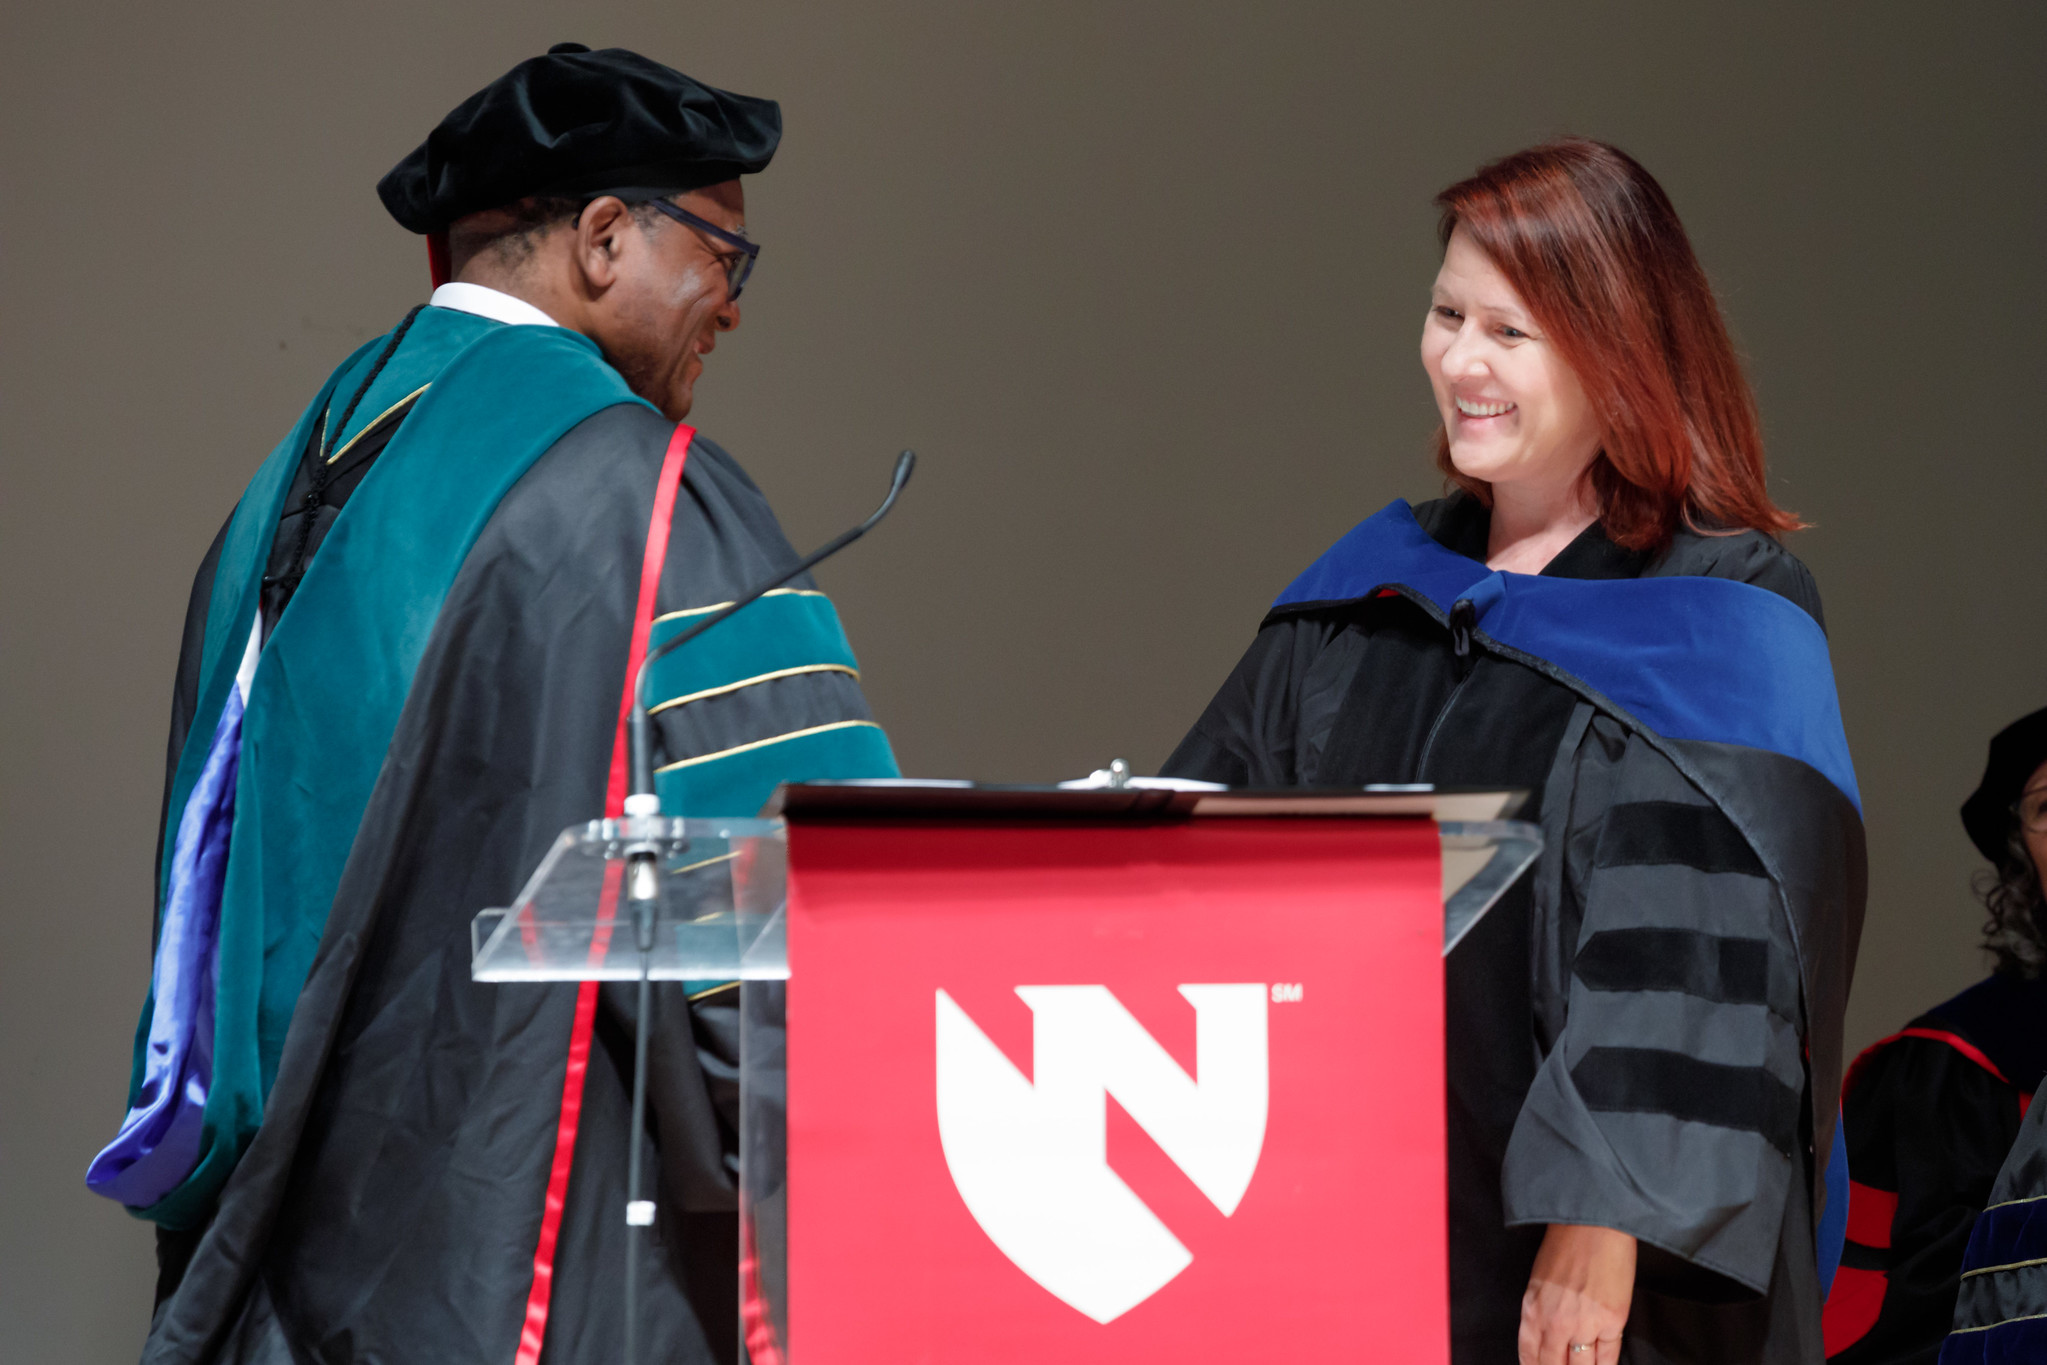 Dele Davies&comma; MD&comma; dean for graduate studies&comma; greets UNMC Graduate Studies alumnus Robin Cotter&comma; PhD&comma; before she gives the keynote address at the 2023 Winter Honors Convocation&period;